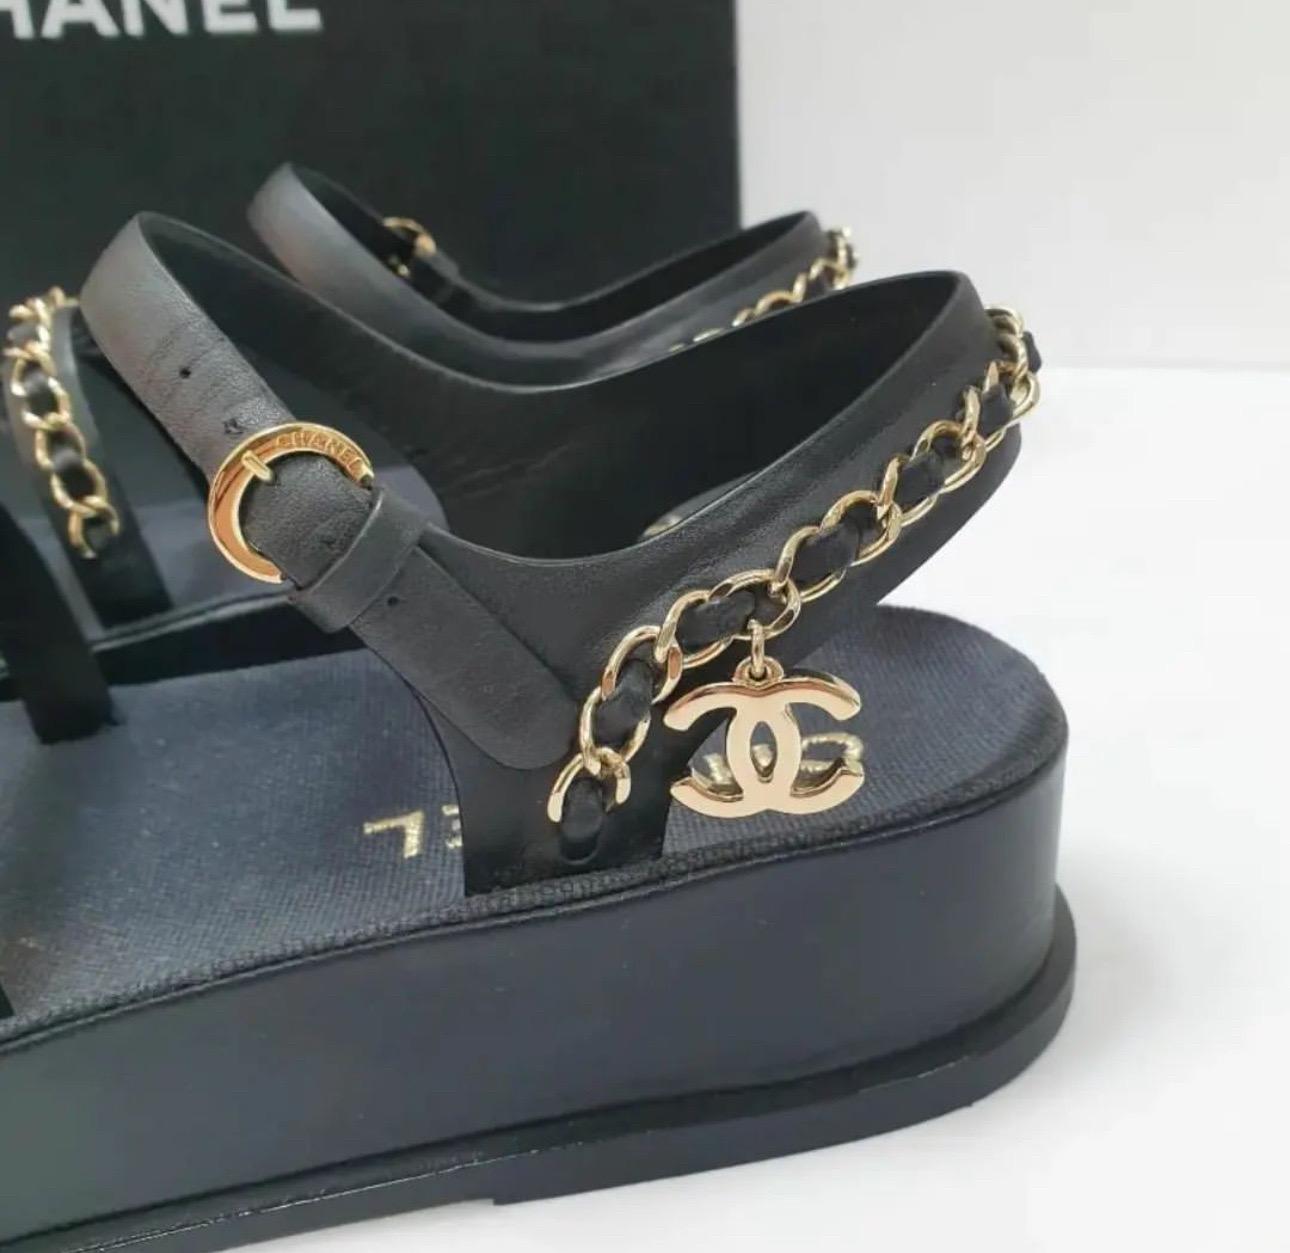 This is an authentic pair of CHANEL Calfskin Chain Platform Sandals  in black. 
These stylish sandals are crafted of classic black calfskin leather and feature gold leather threaded chain link straps.
 Sz.36
Very good condition.
No box. No dust bag.